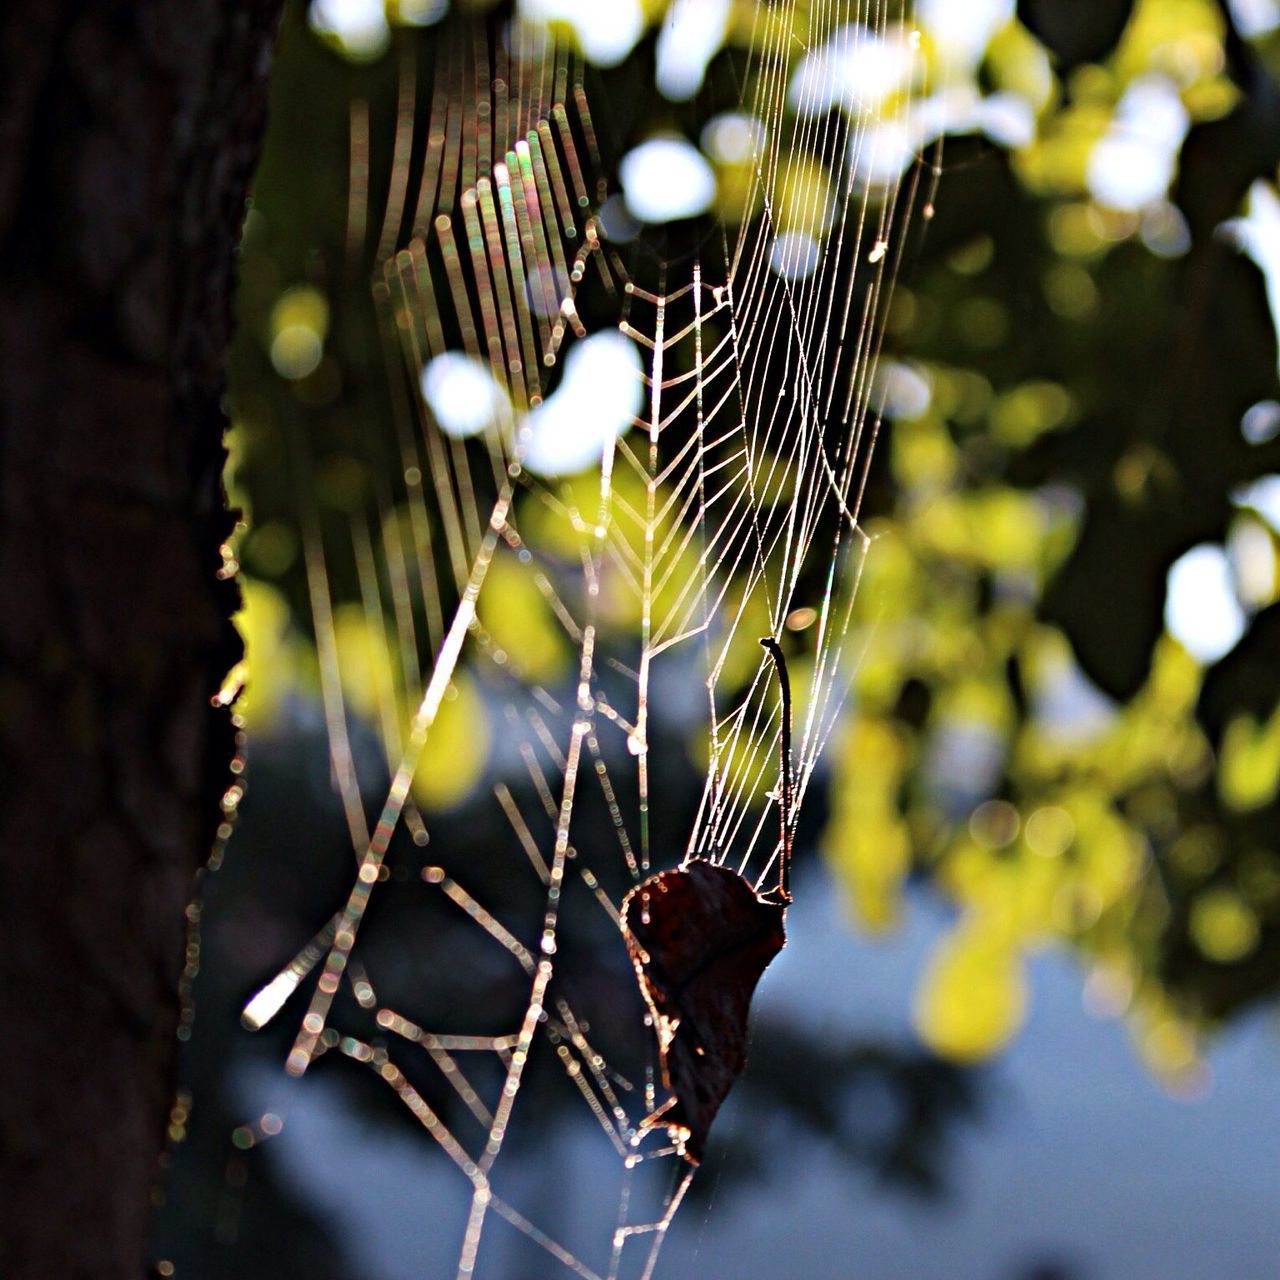 focus on foreground, spider web, animal themes, one animal, close-up, animals in the wild, insect, wildlife, natural pattern, nature, selective focus, spider, outdoors, day, no people, branch, sunlight, fragility, pattern, animal markings